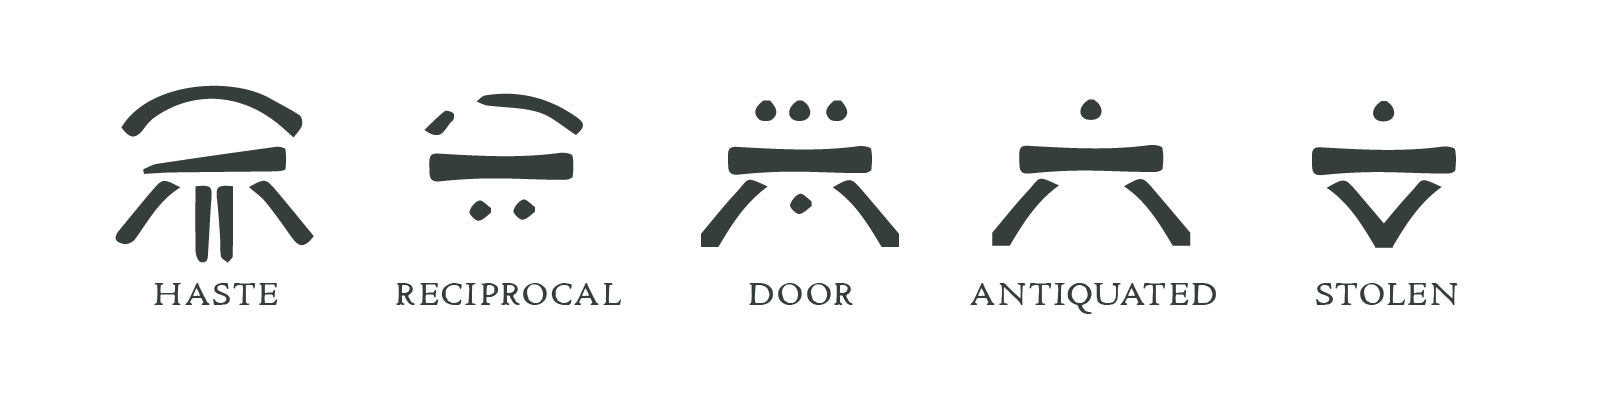 A collection of Hive runes for "Haste", "Reciprocal", "Door", "Antiquated" and "Stolen"